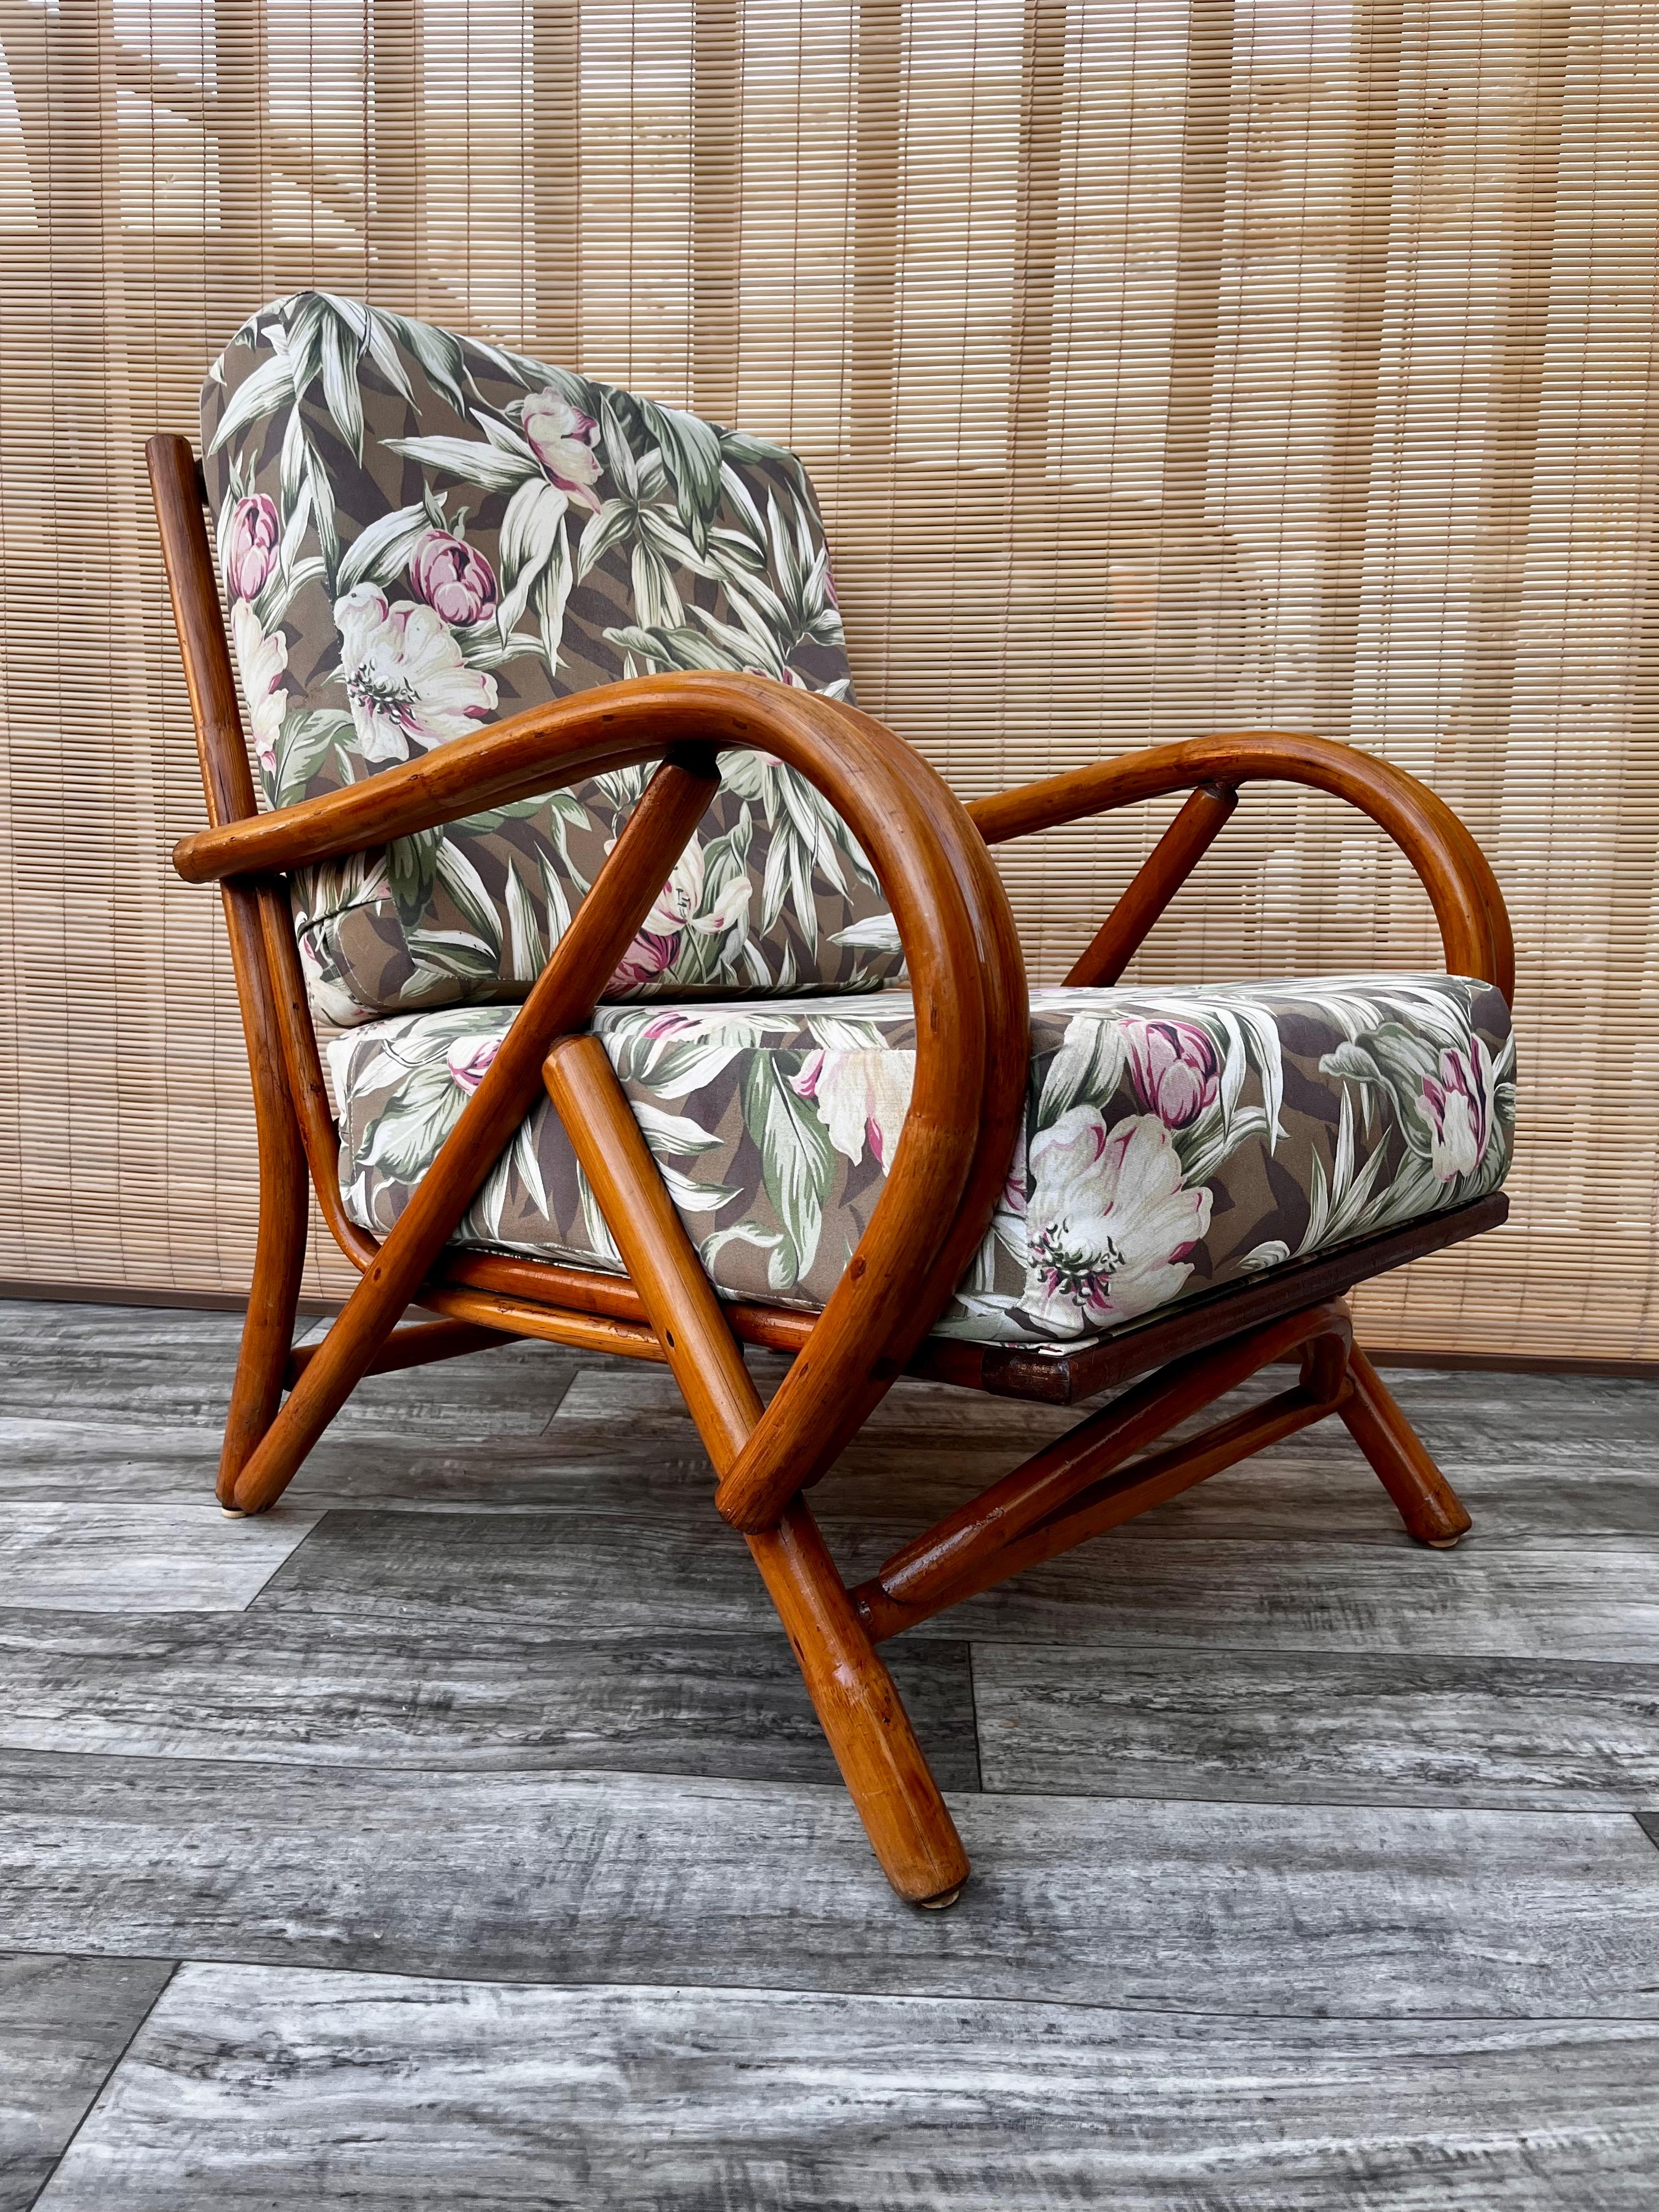 Vintage Mid-Century Modern Rattan lounge chair, circa 1960s
Feature a rattan frame and bent rattan armrests with removable seating and backrest cushions, upholstered in floral motive fabric.
In good sound and cosmetic condition with signs of wear